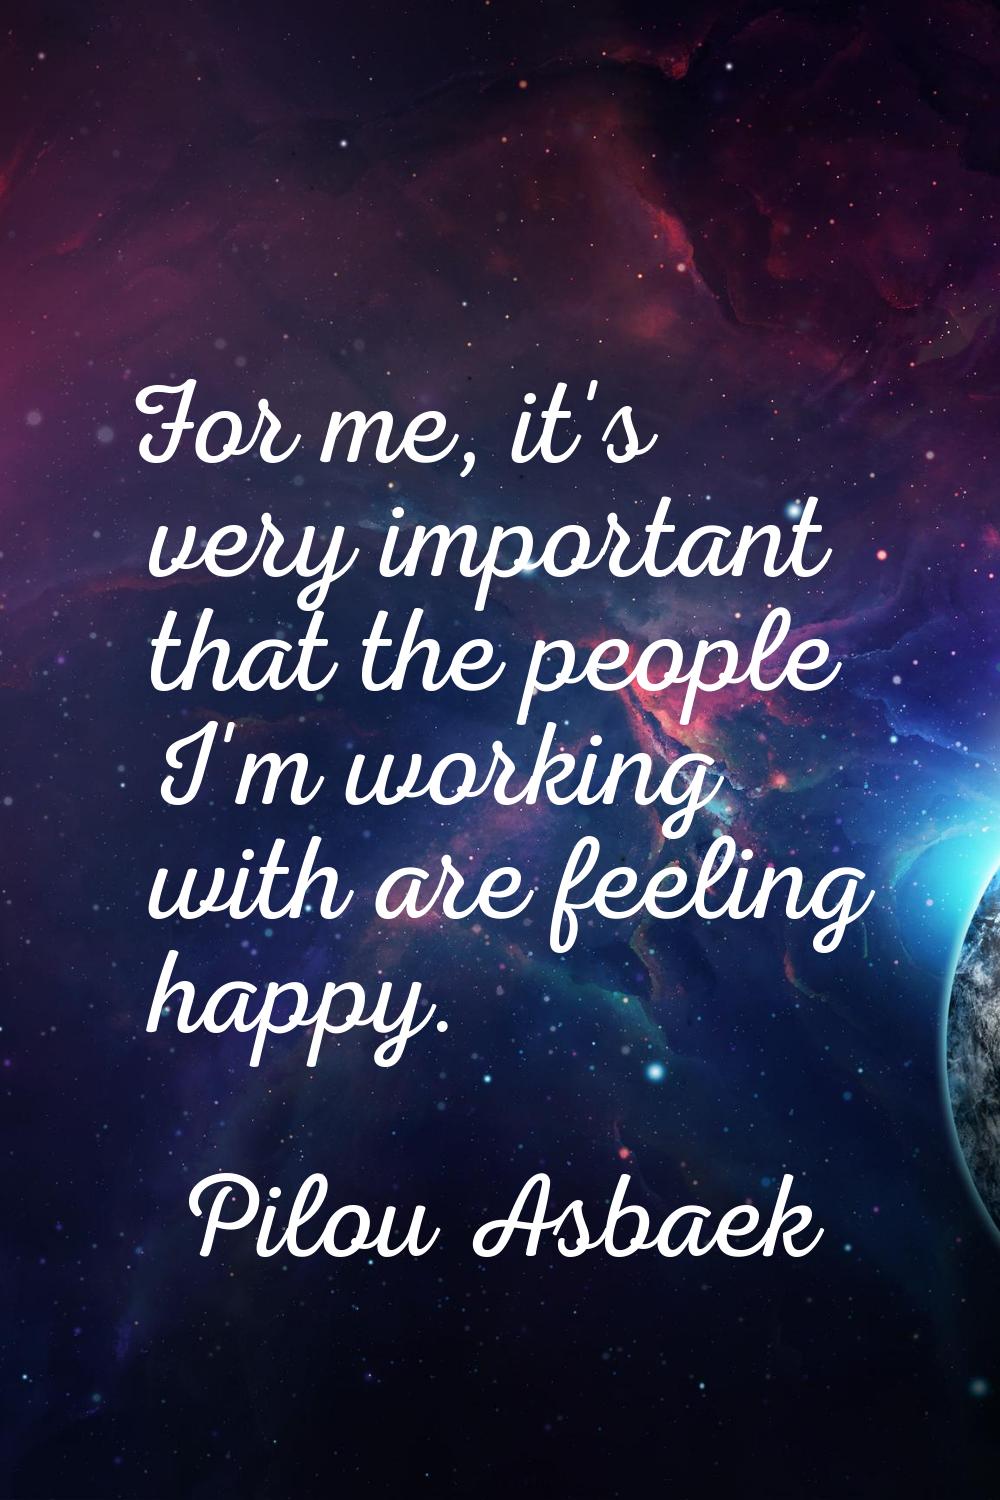 For me, it's very important that the people I'm working with are feeling happy.